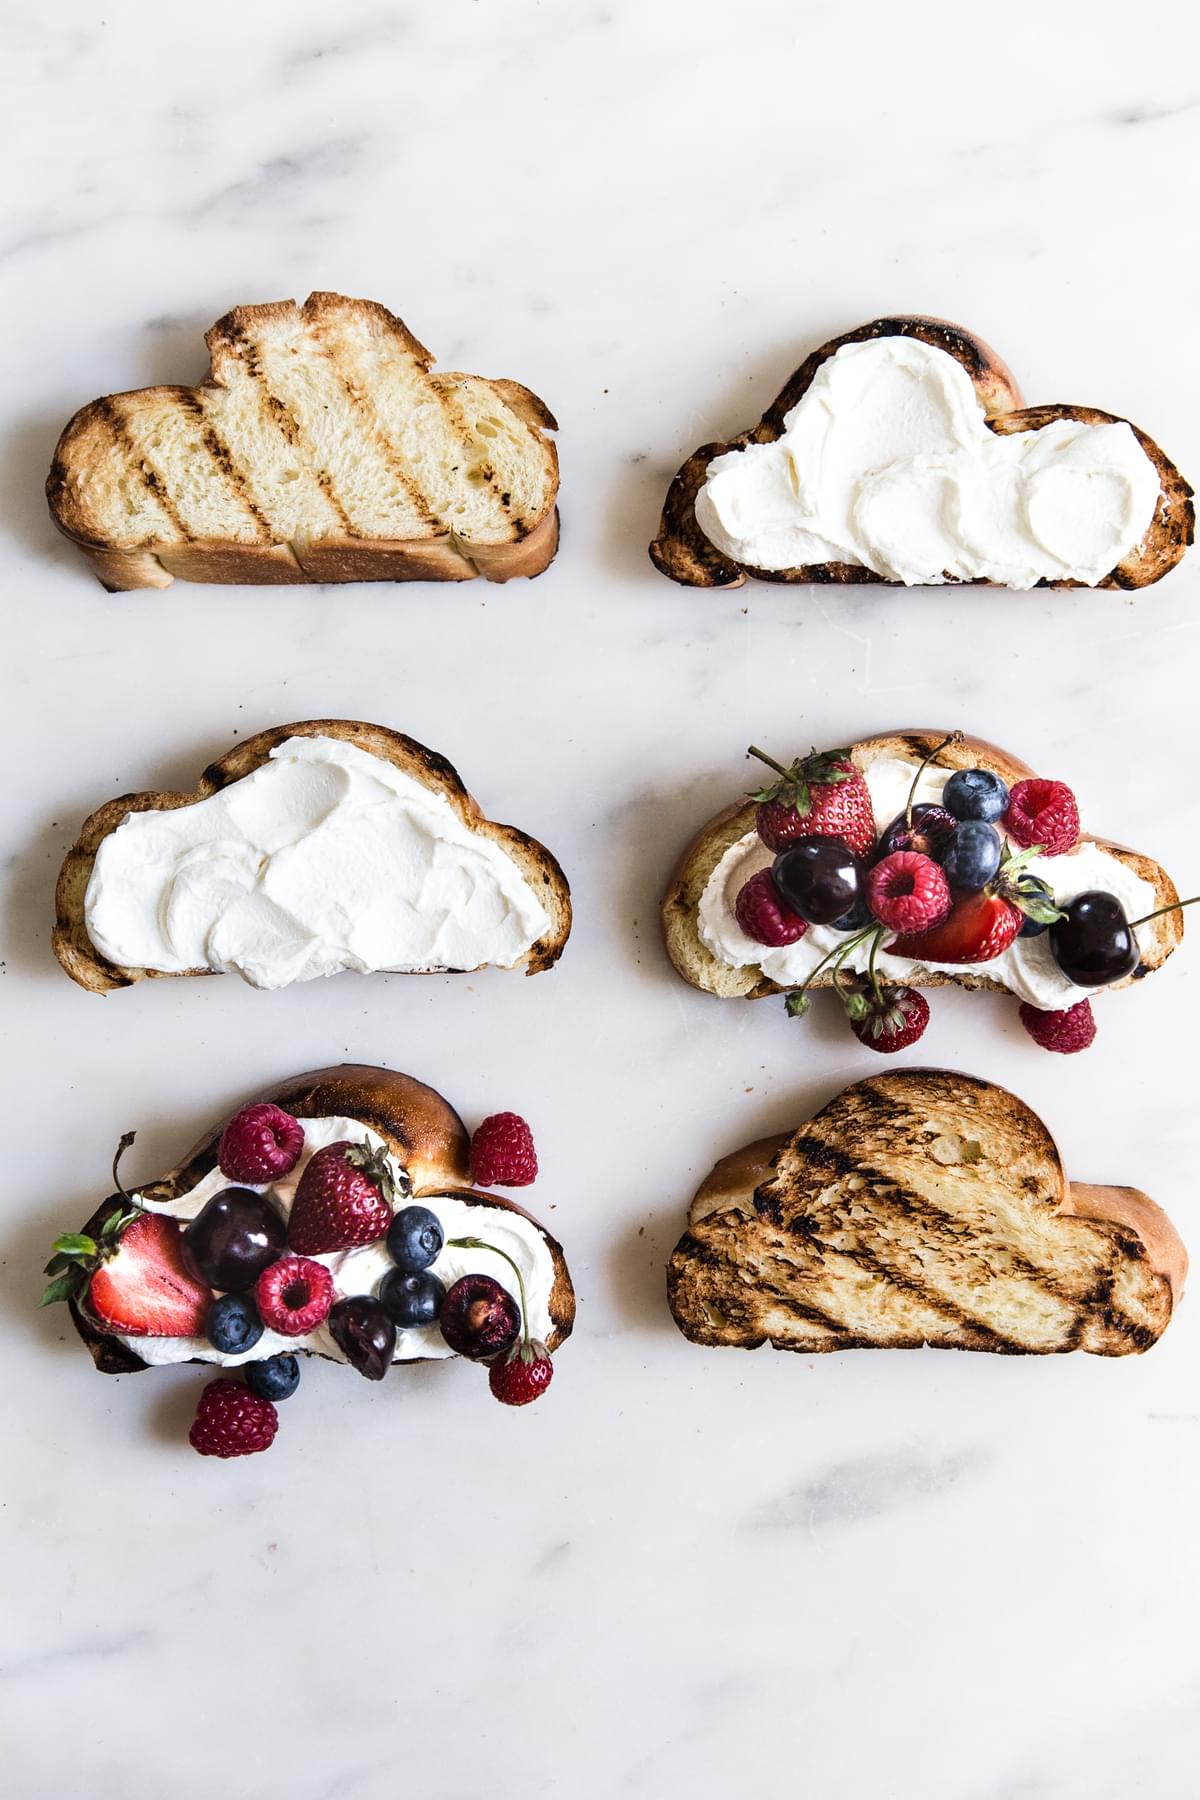 6 grilled challah bread slices with mascarpone and yogurt spread topped with fresh berries